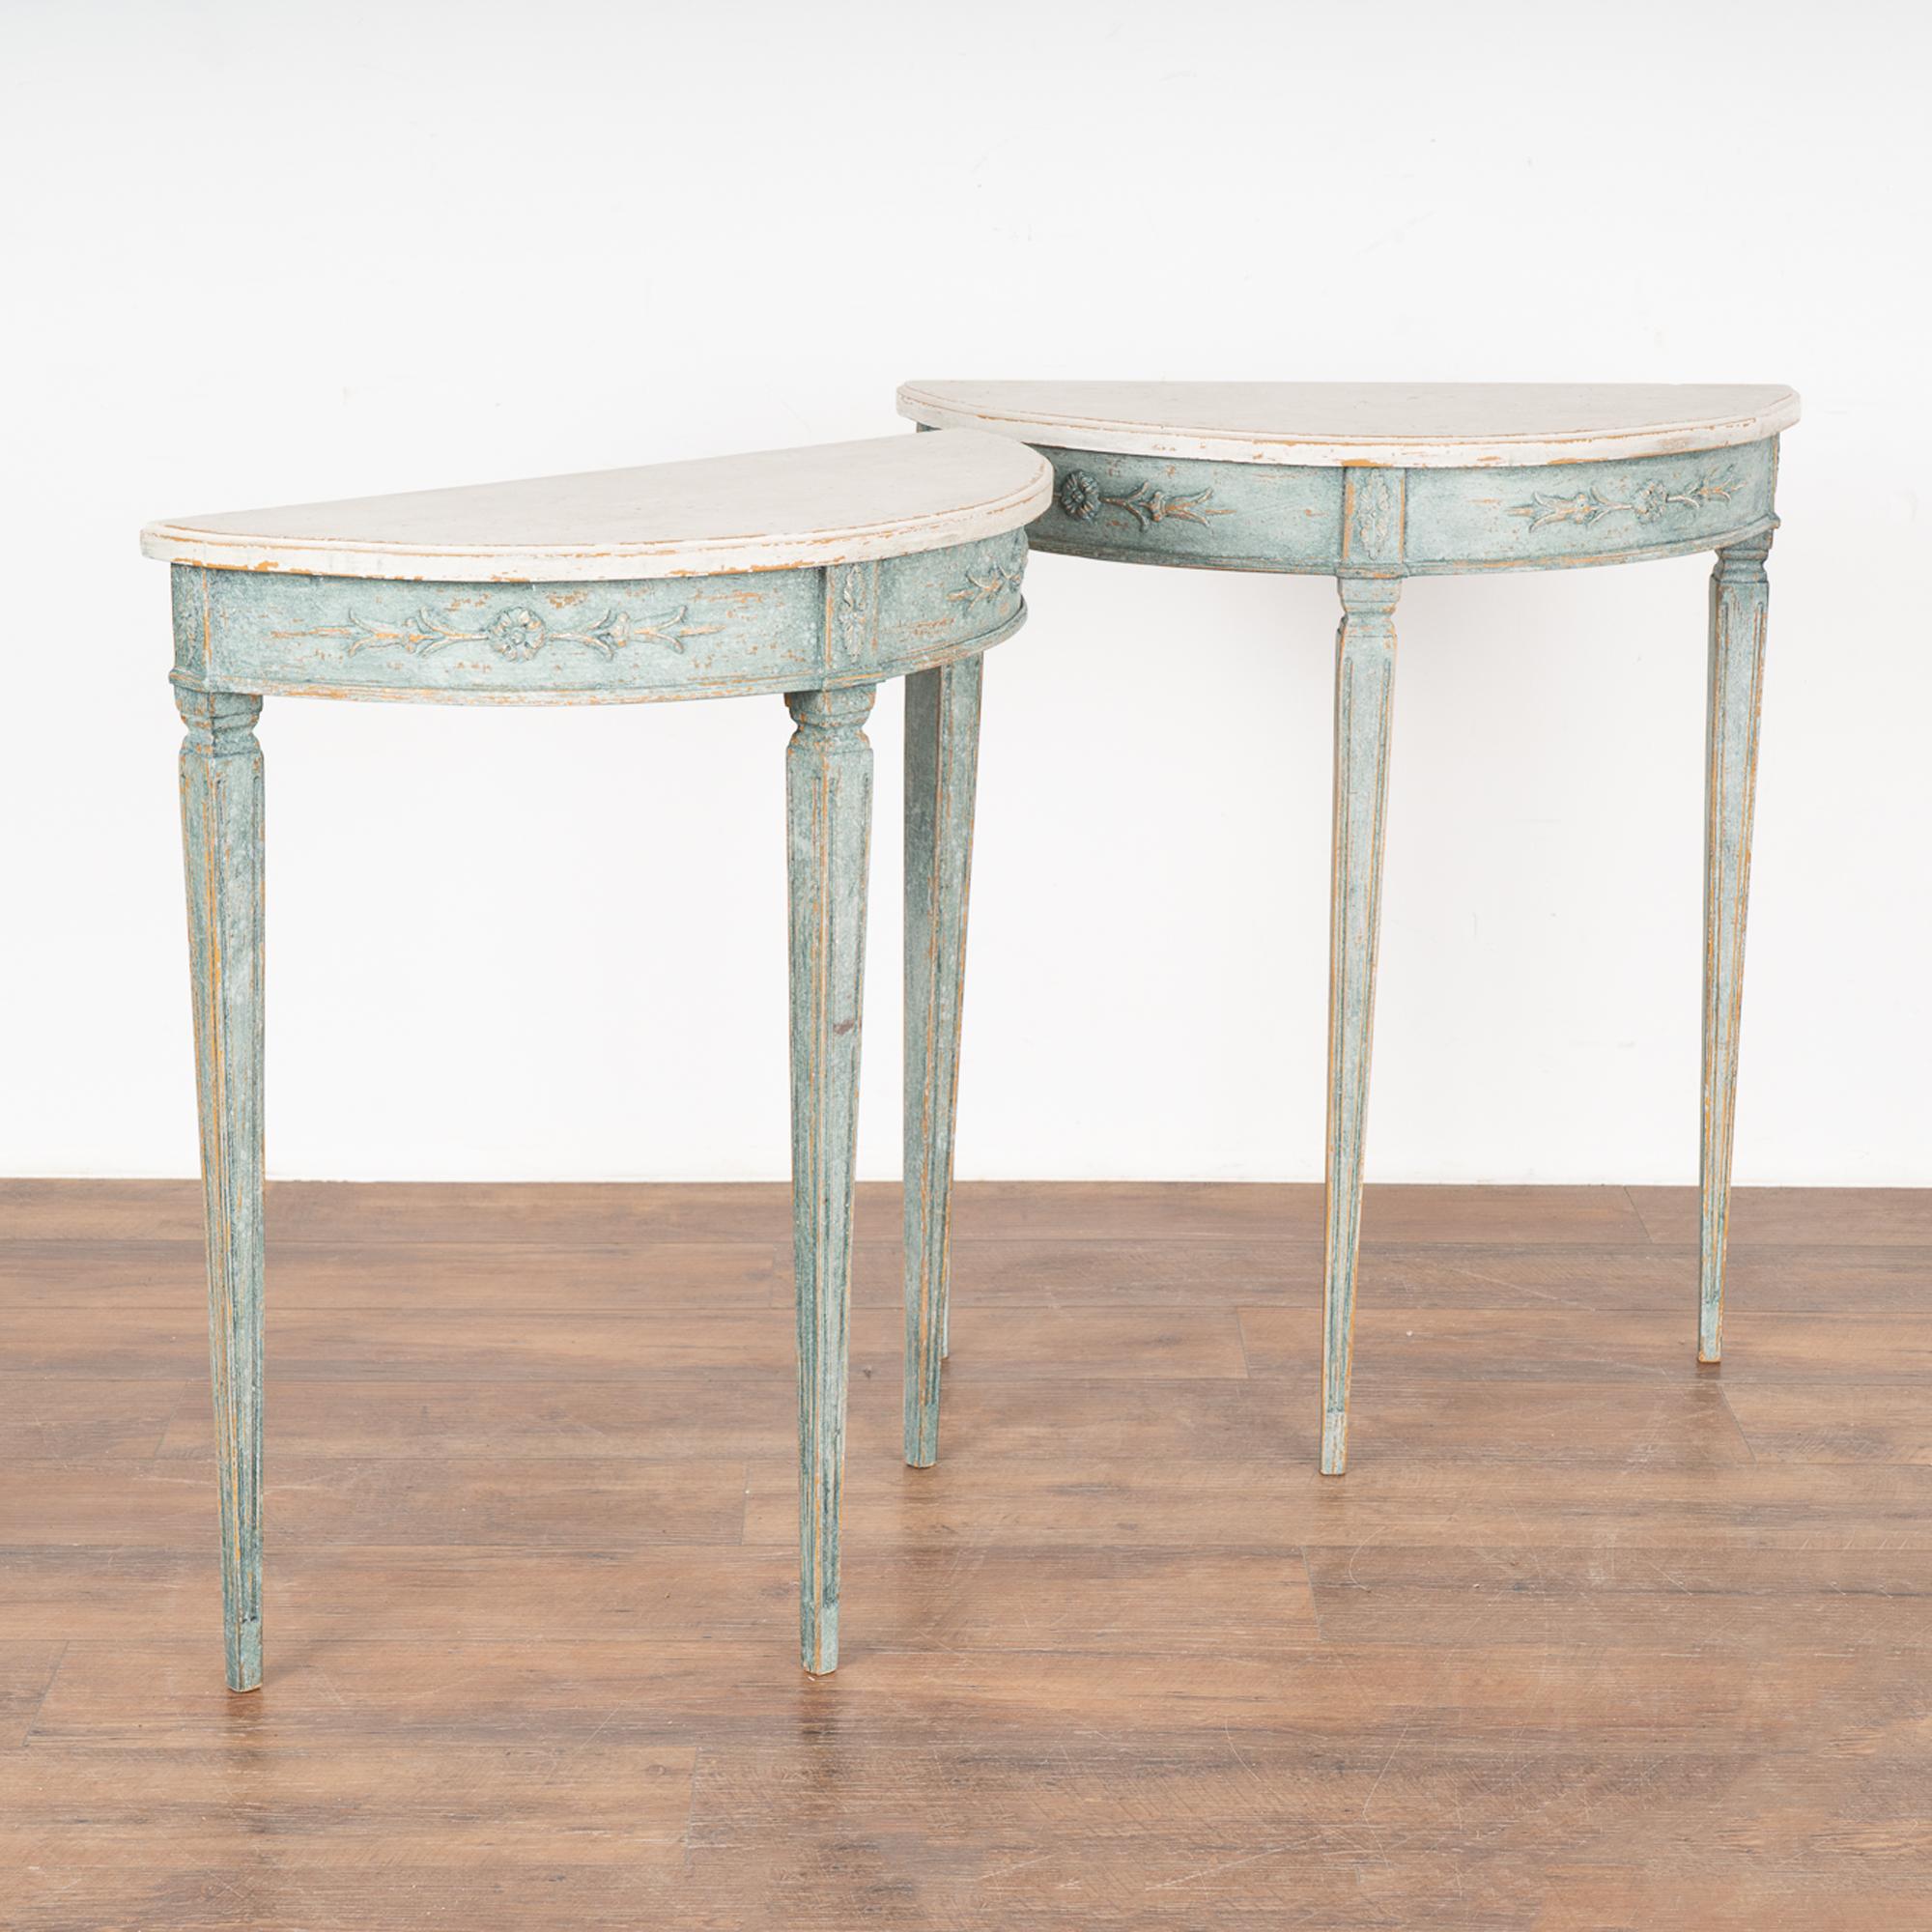 This enchanting pair of antique demi lune tables are from Sweden; note the slender tapered/fluted legs and lovely skirt with applied carving.
Both these side tables are finished with a newer, professionally applied layered blue paint and